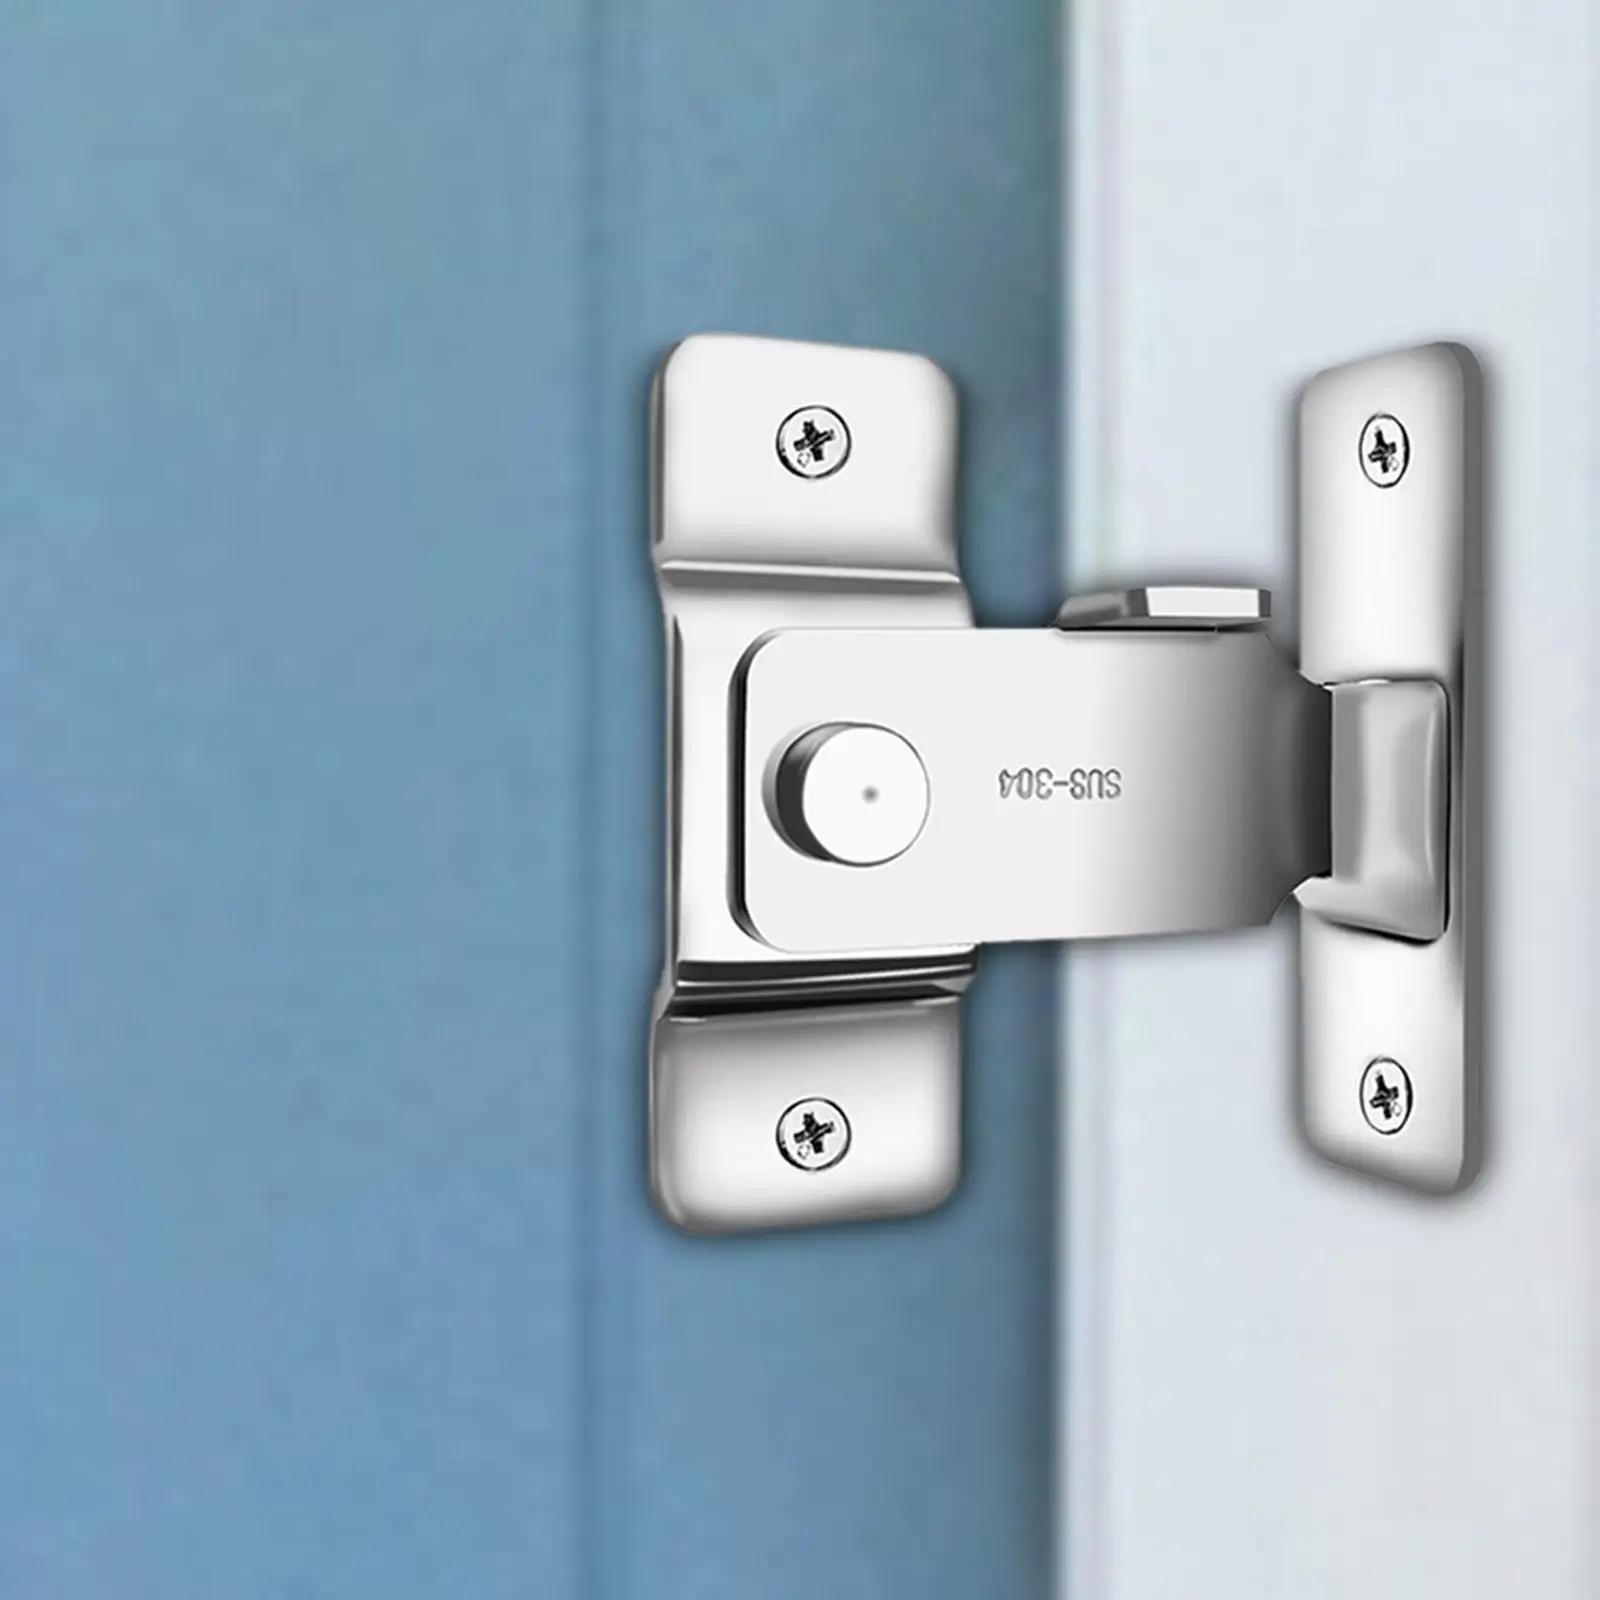 90 Degree Right Angle Door Latch Hasp Bending Latch Buckle Barn Sliding Lock with Screws for Toilet Doors and Windows